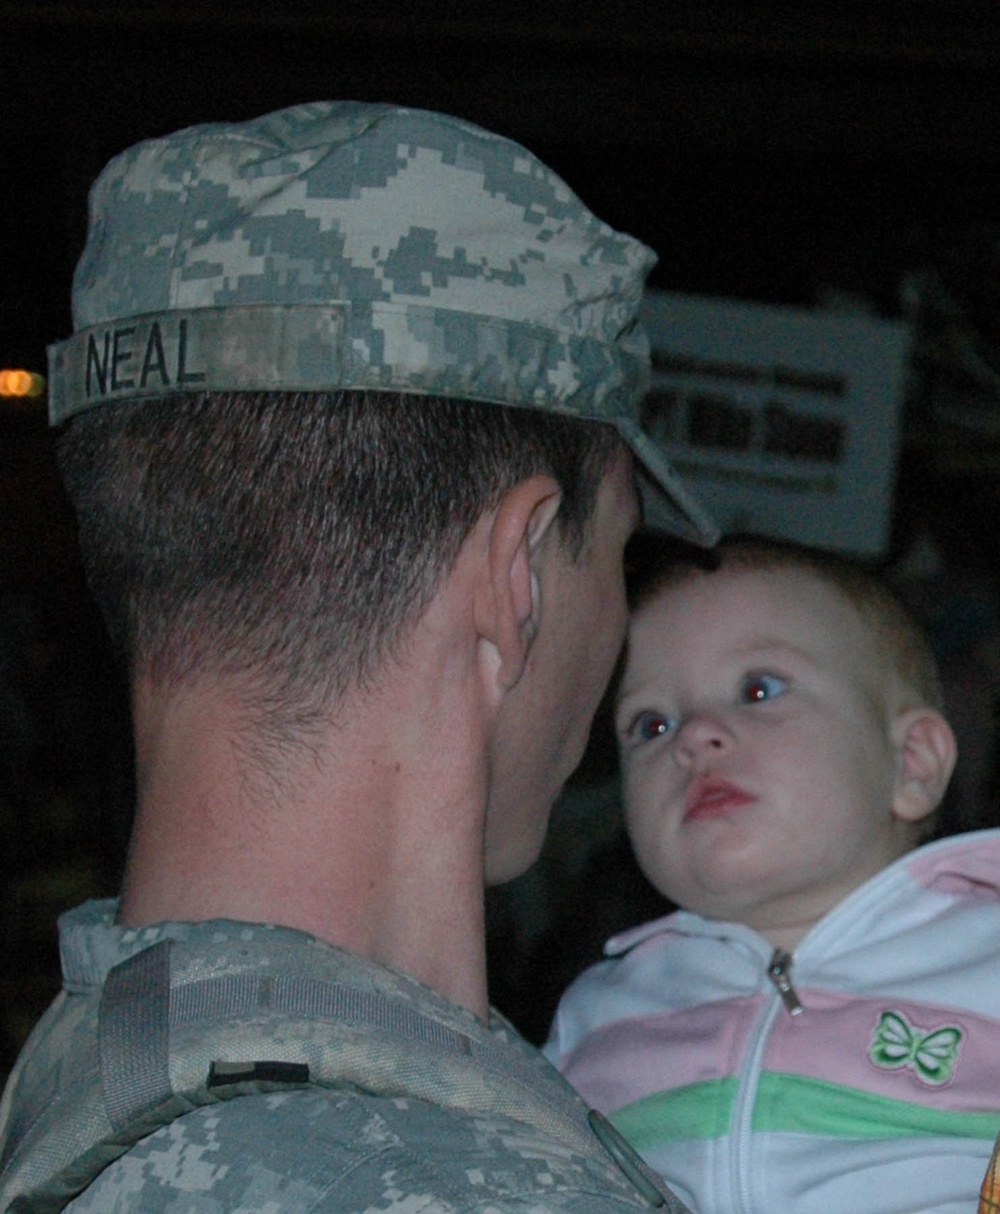 Cav. Families Thankful for Soldiers' Holiday Return